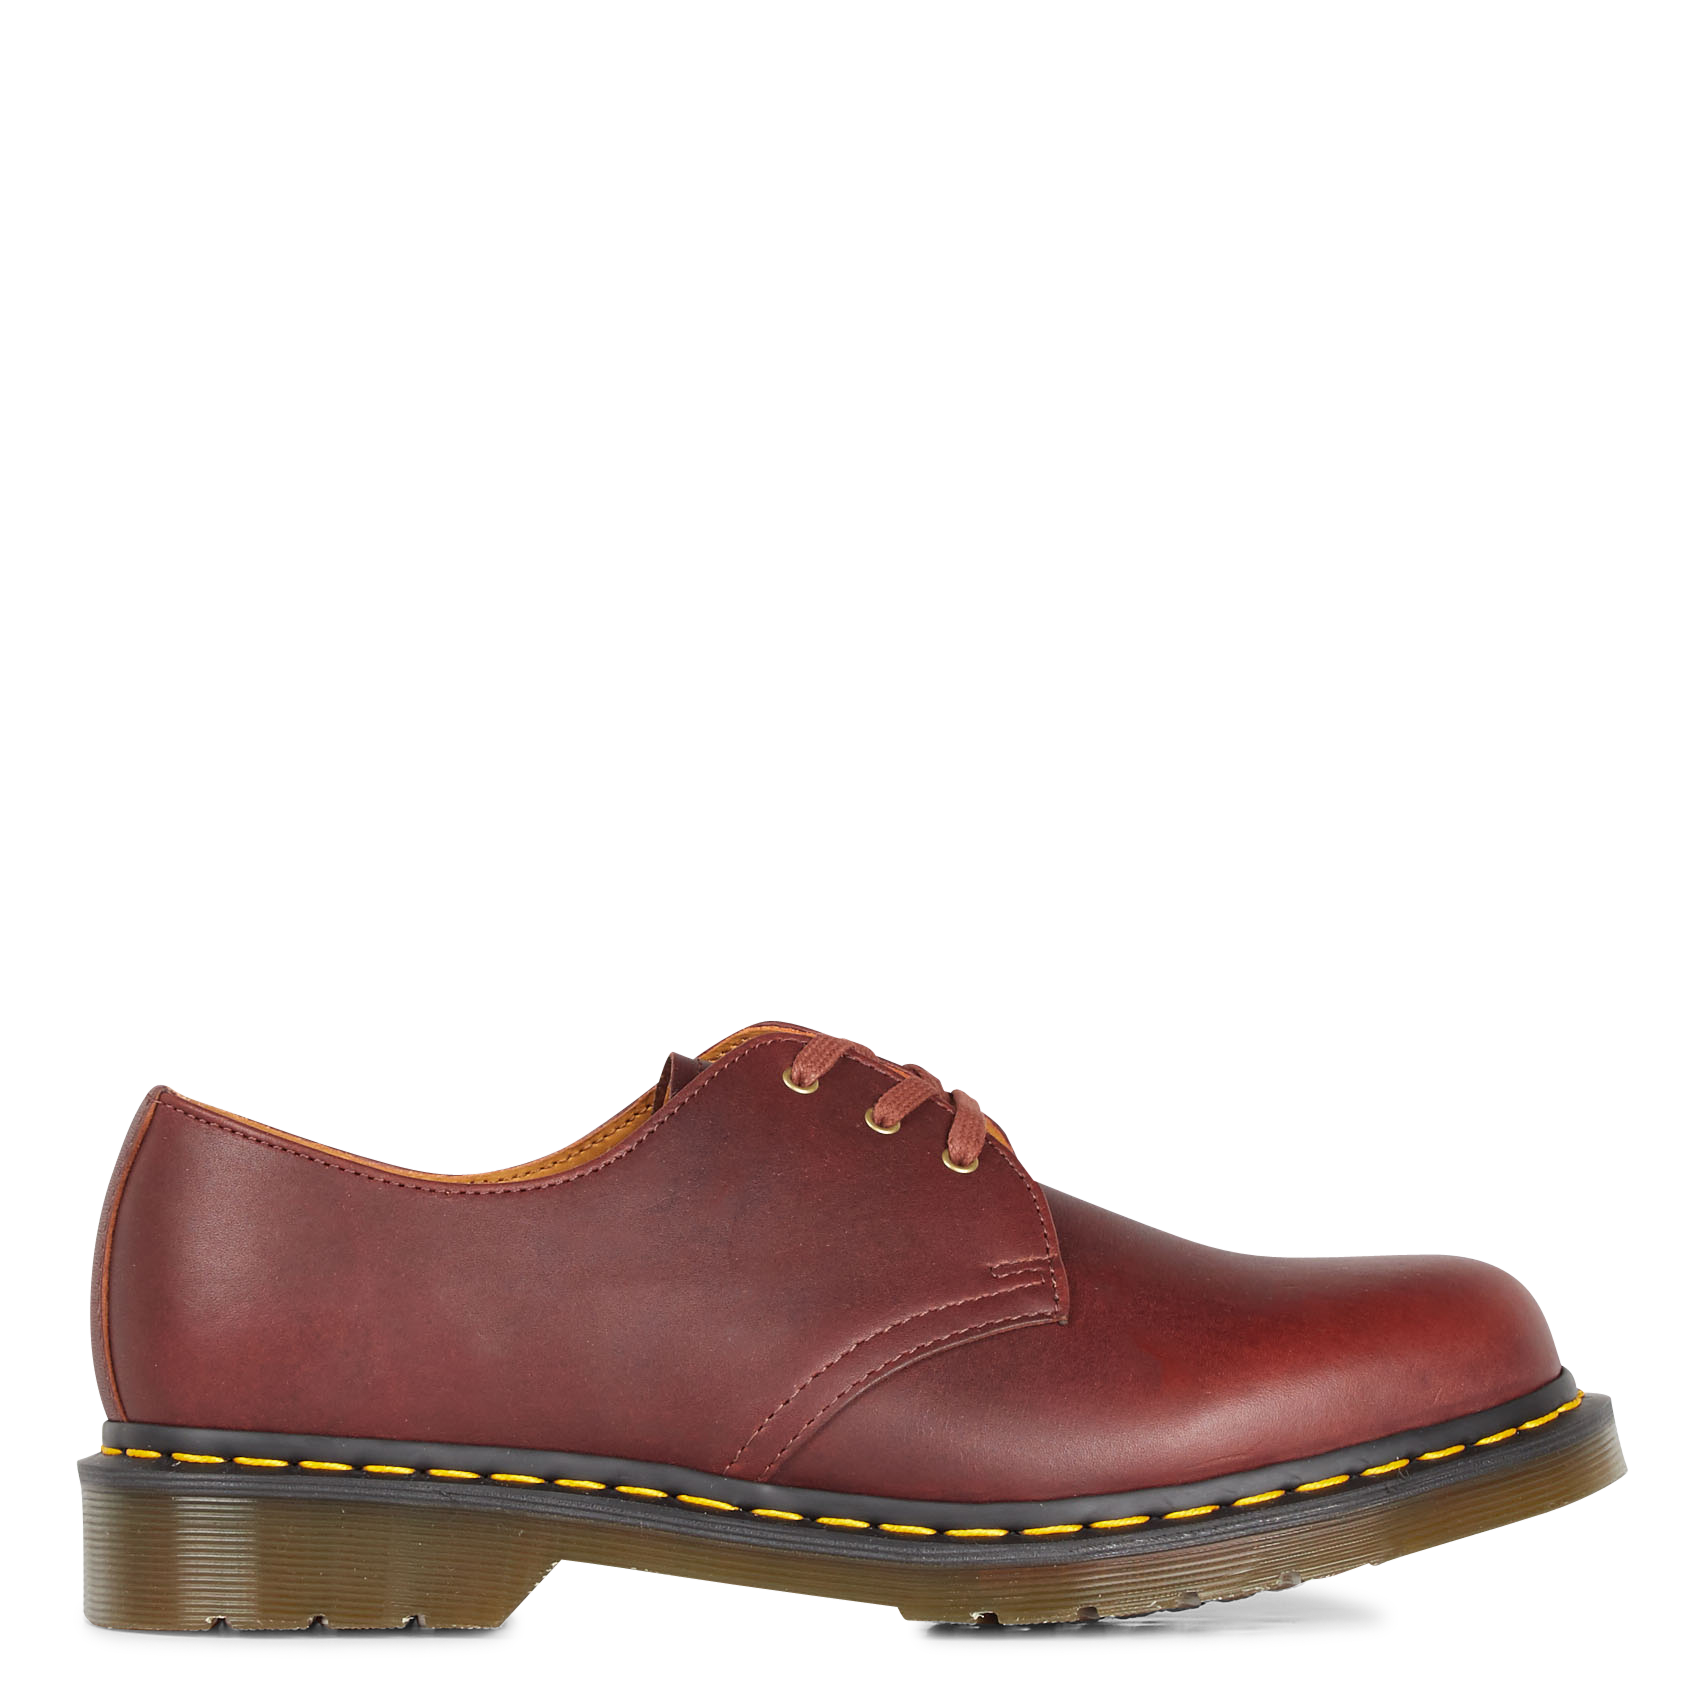 where to buy dr martens online